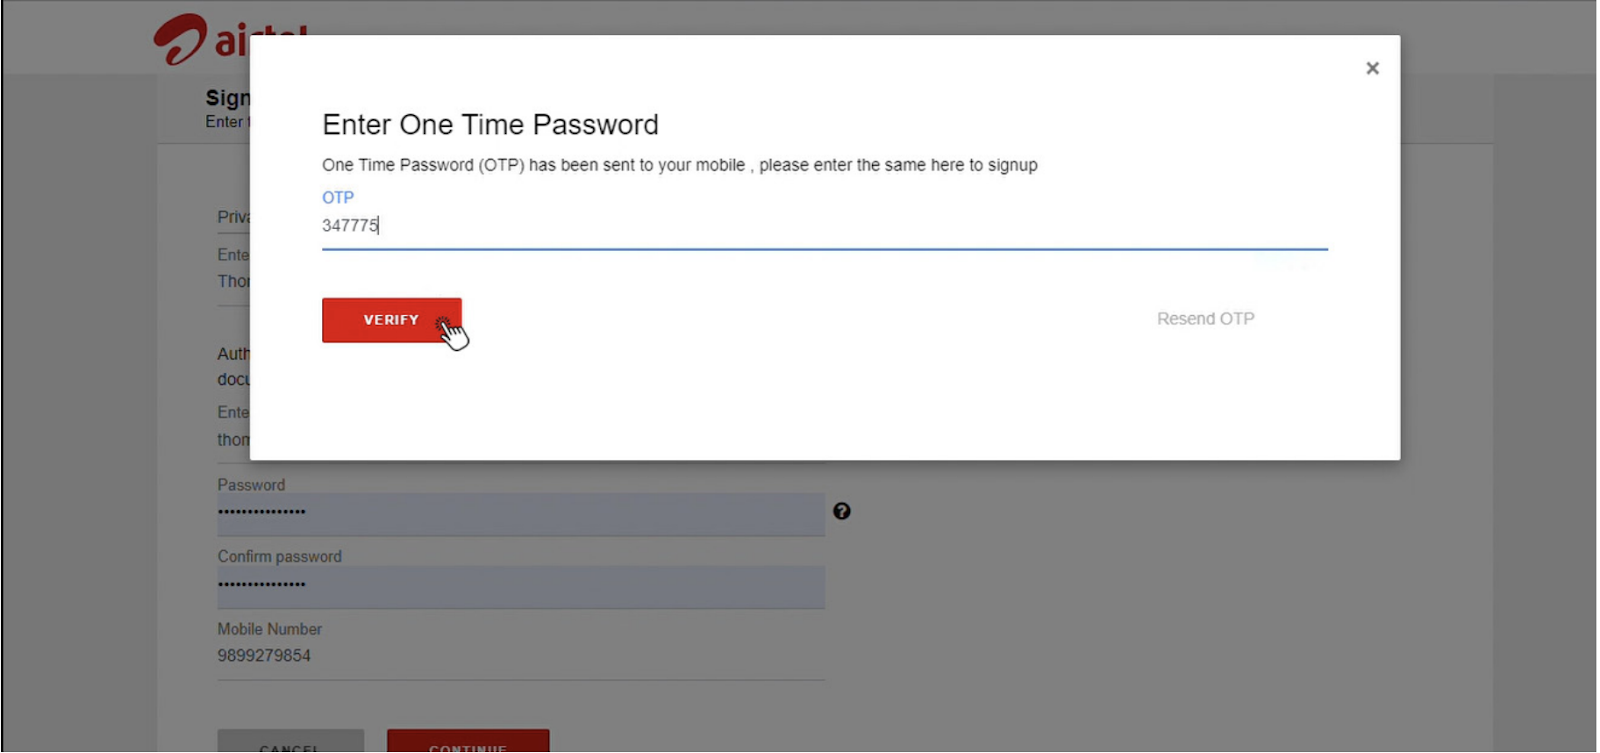 One Time Password pop up on Airtel DLT portal during registration | SMSCountry